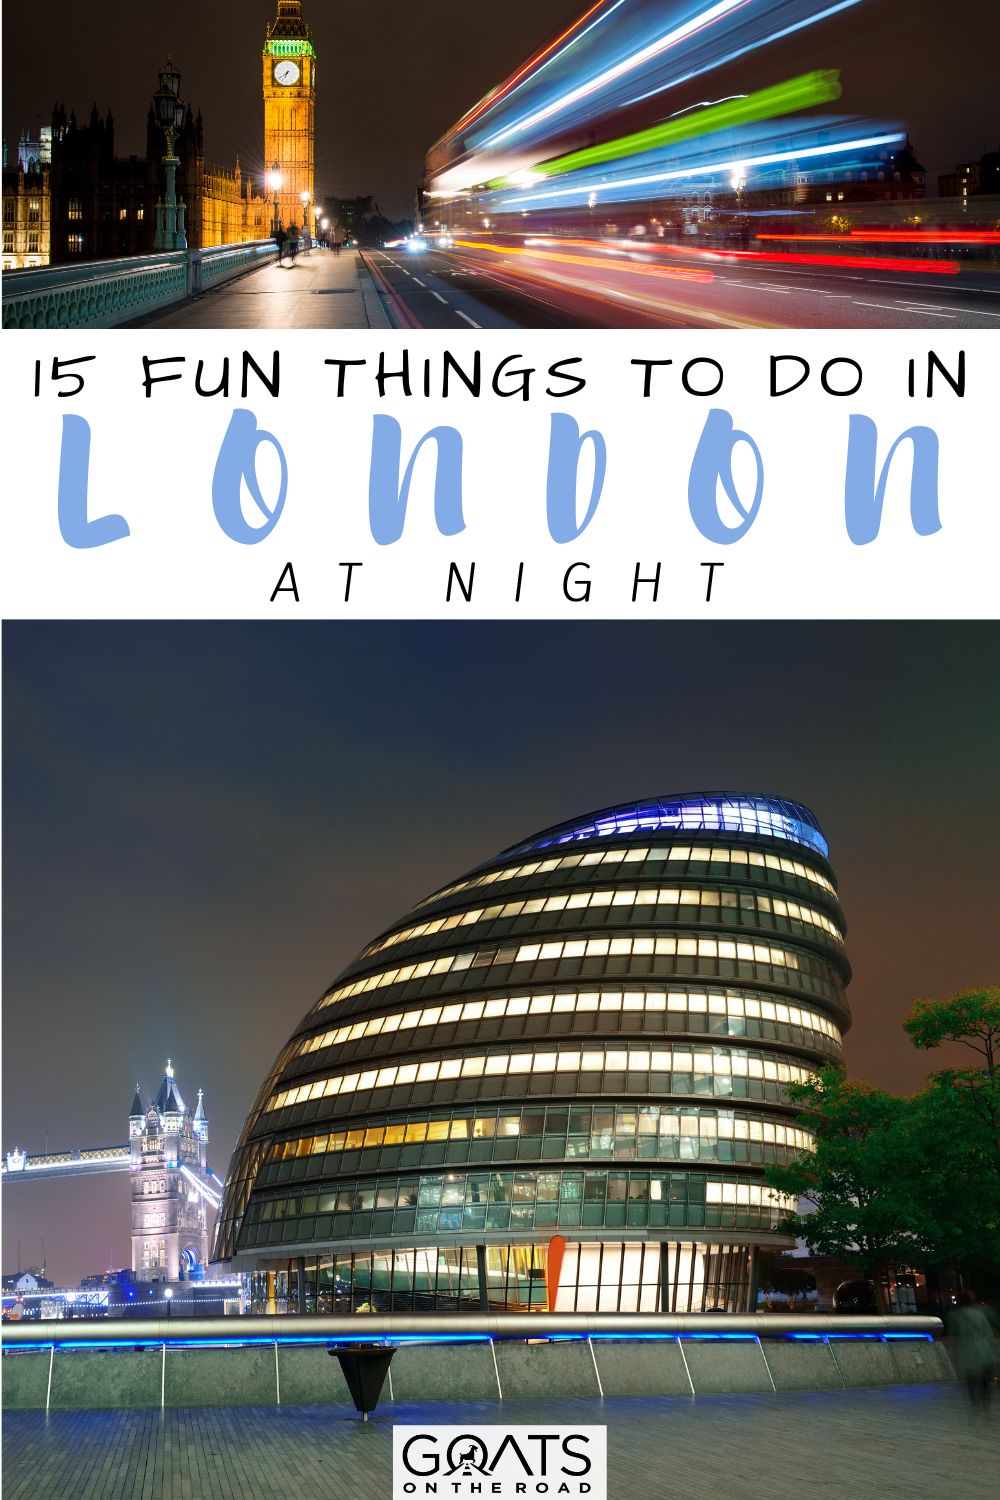 “15 Fun Things To Do in London at Night